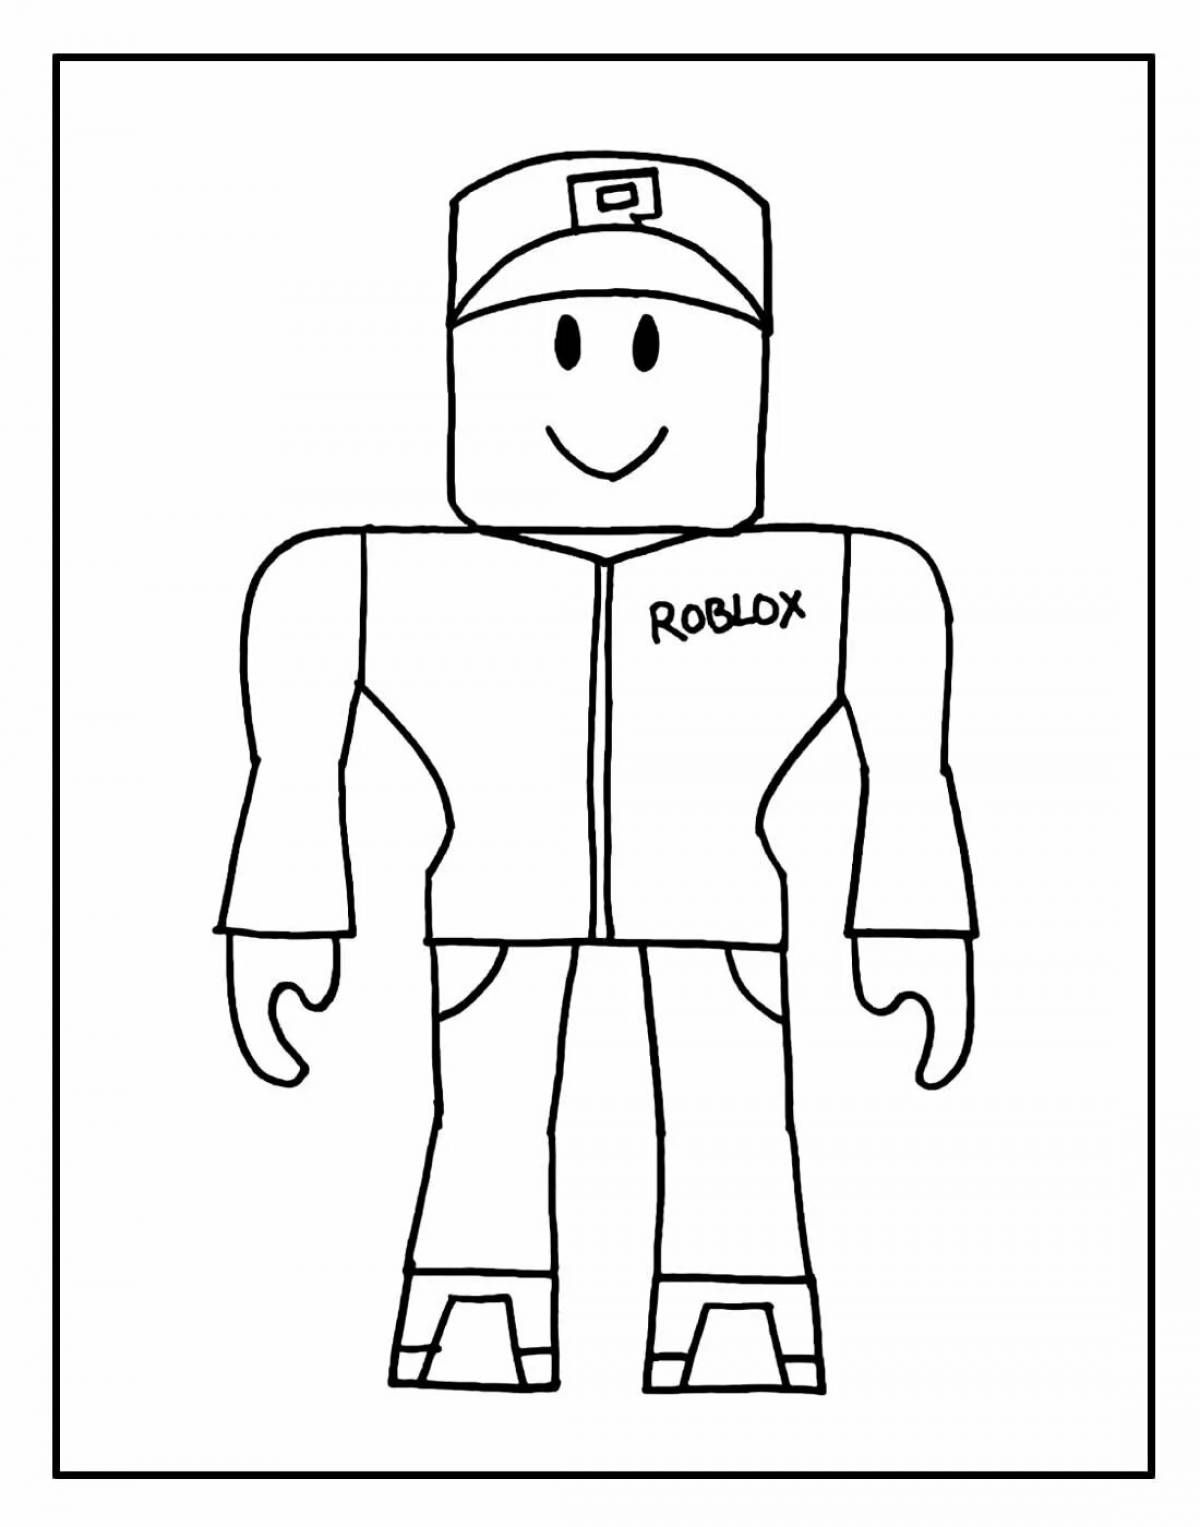 Charming roblox body coloring page